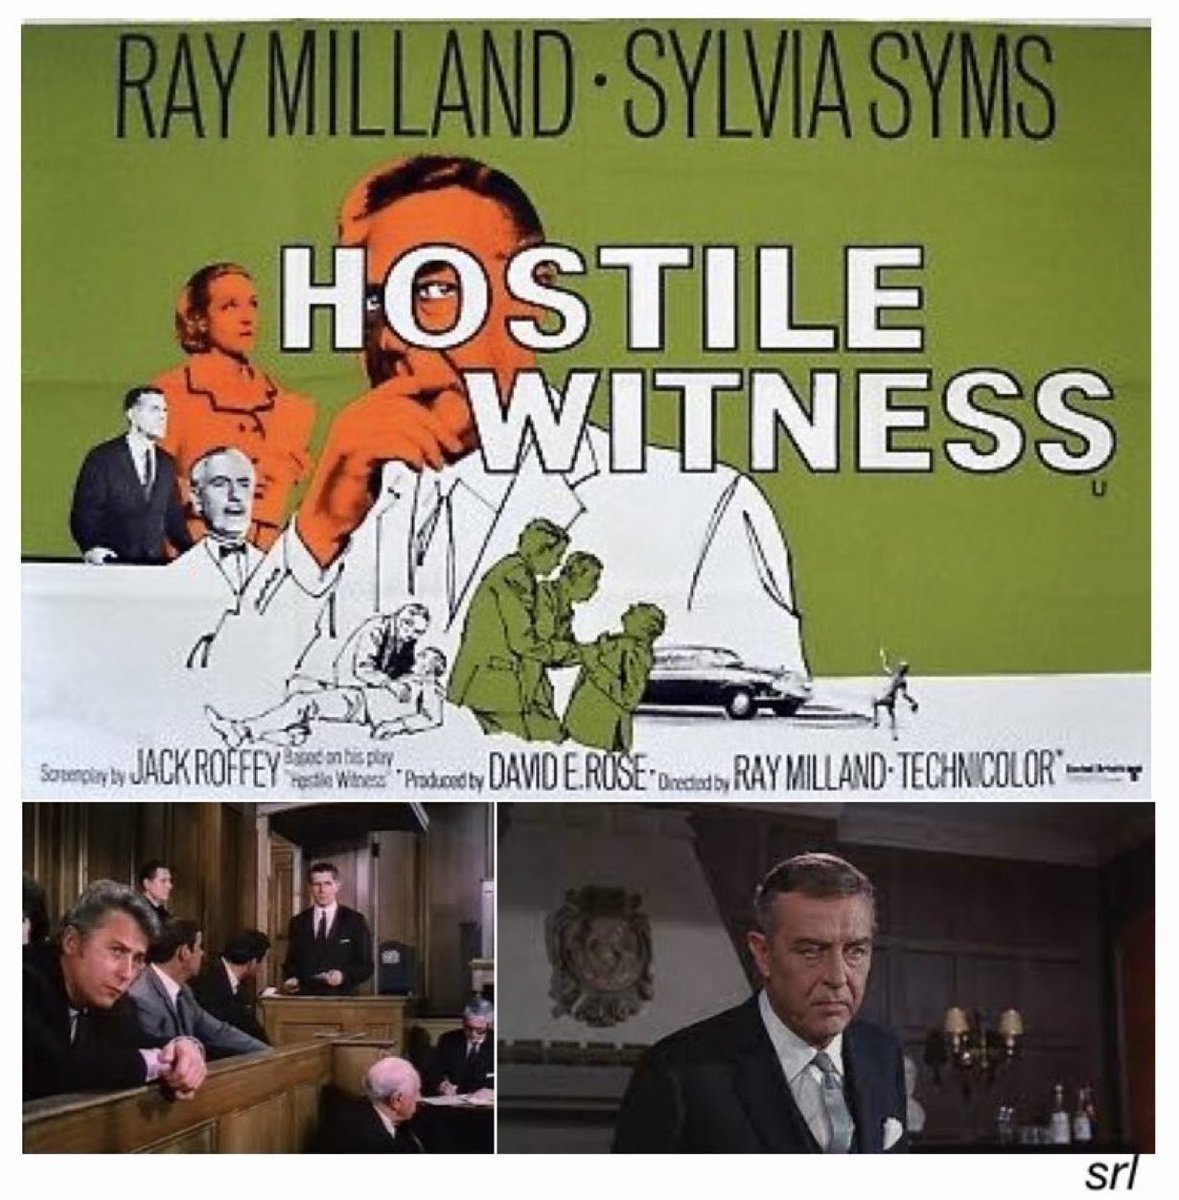 9pm TODAY on @TalkingPicsTV   

The 1968 #Drama film🎥 “Hostile Witness” directed by Ray Milland from a screenplay by #JackRoffey based on his 1964 play🎭

🌟#RayMilland #SylviaSyms #FelixAylmer #RaymondHuntley